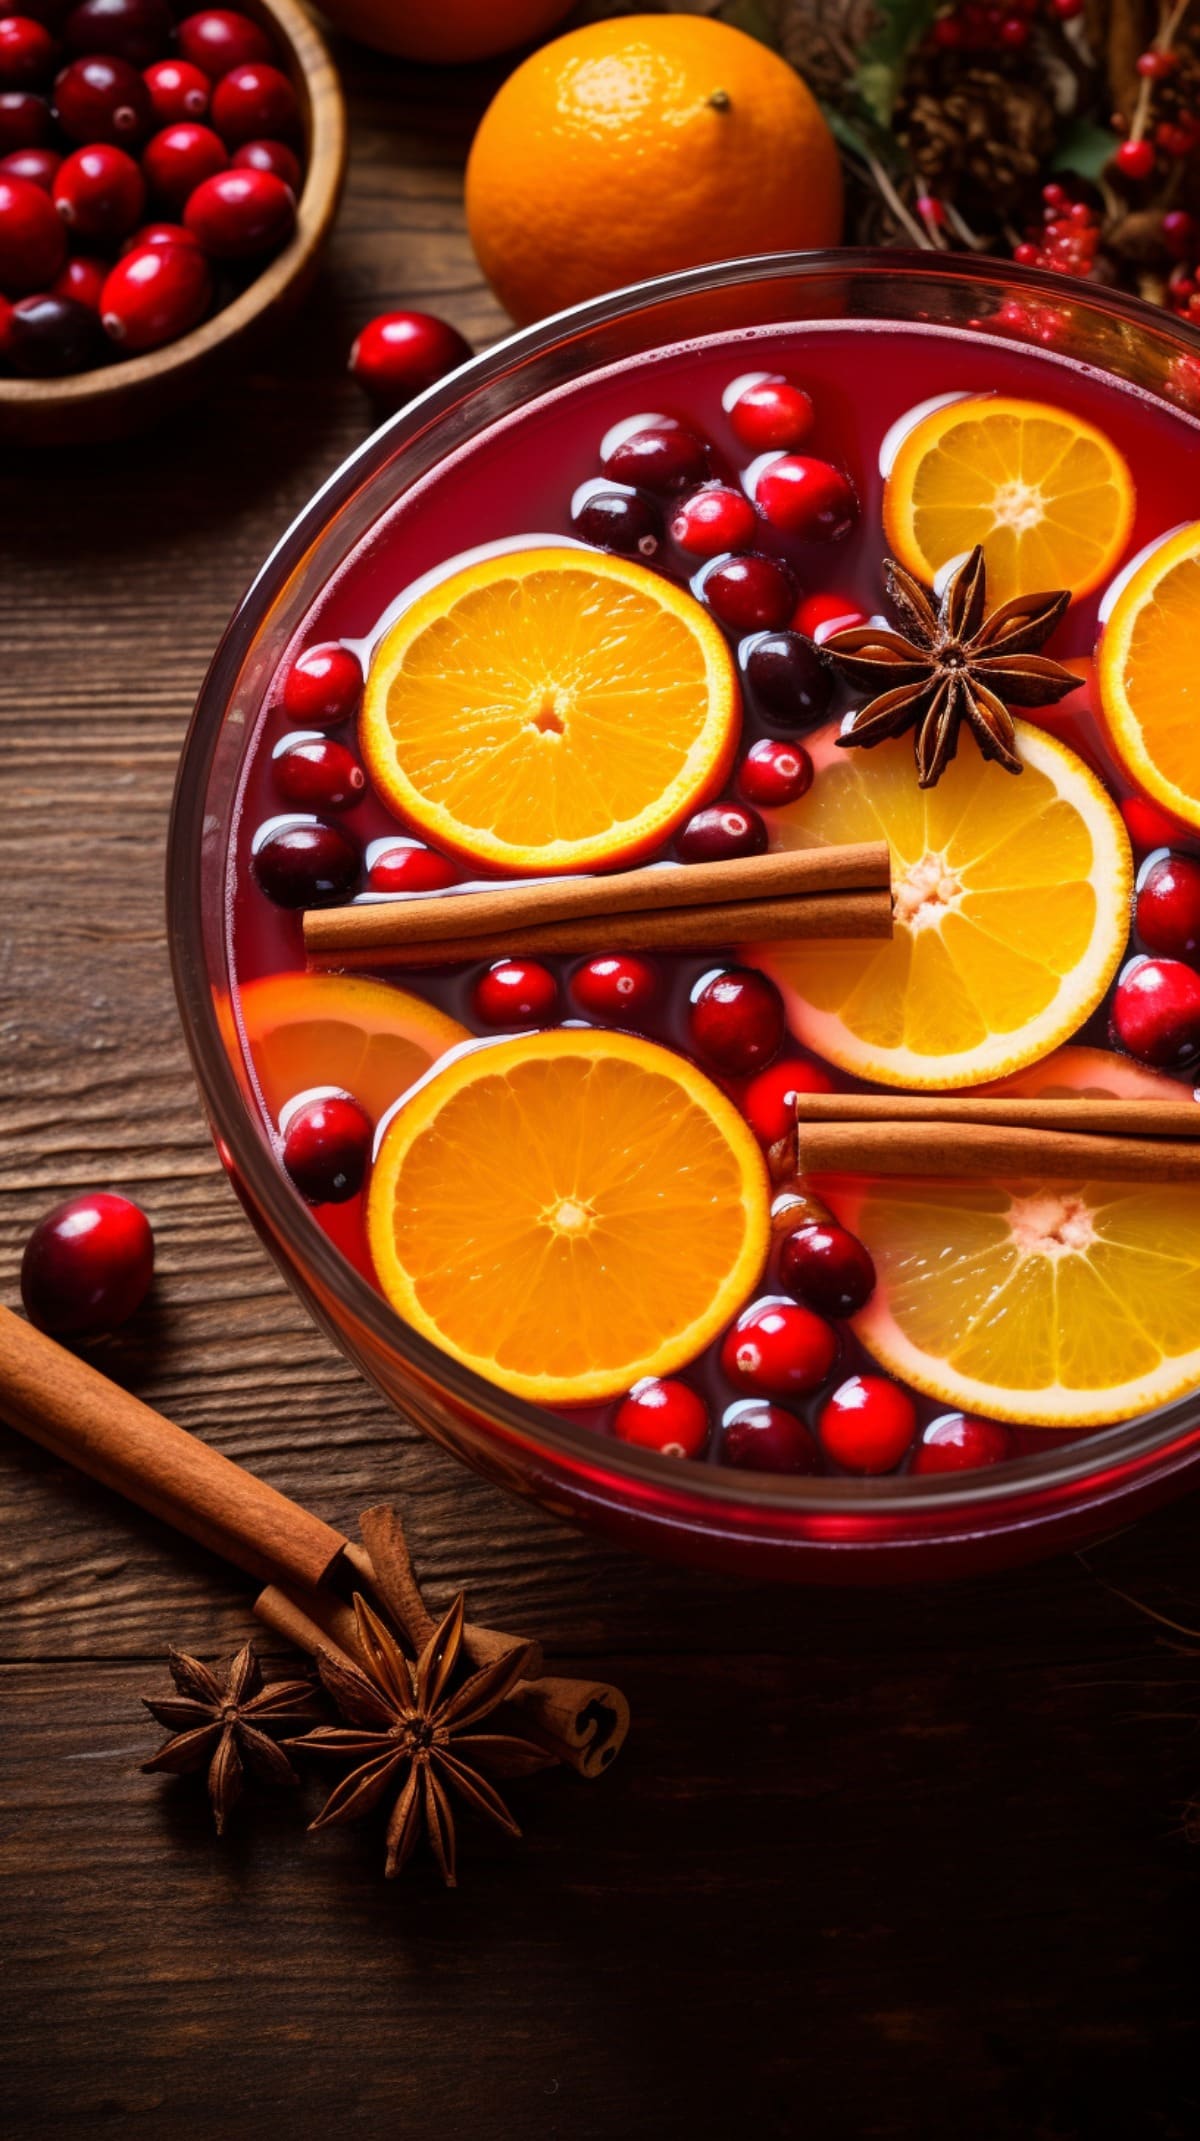 Big punch bowl filled with berries, star anise, cinnamon and orange slices.